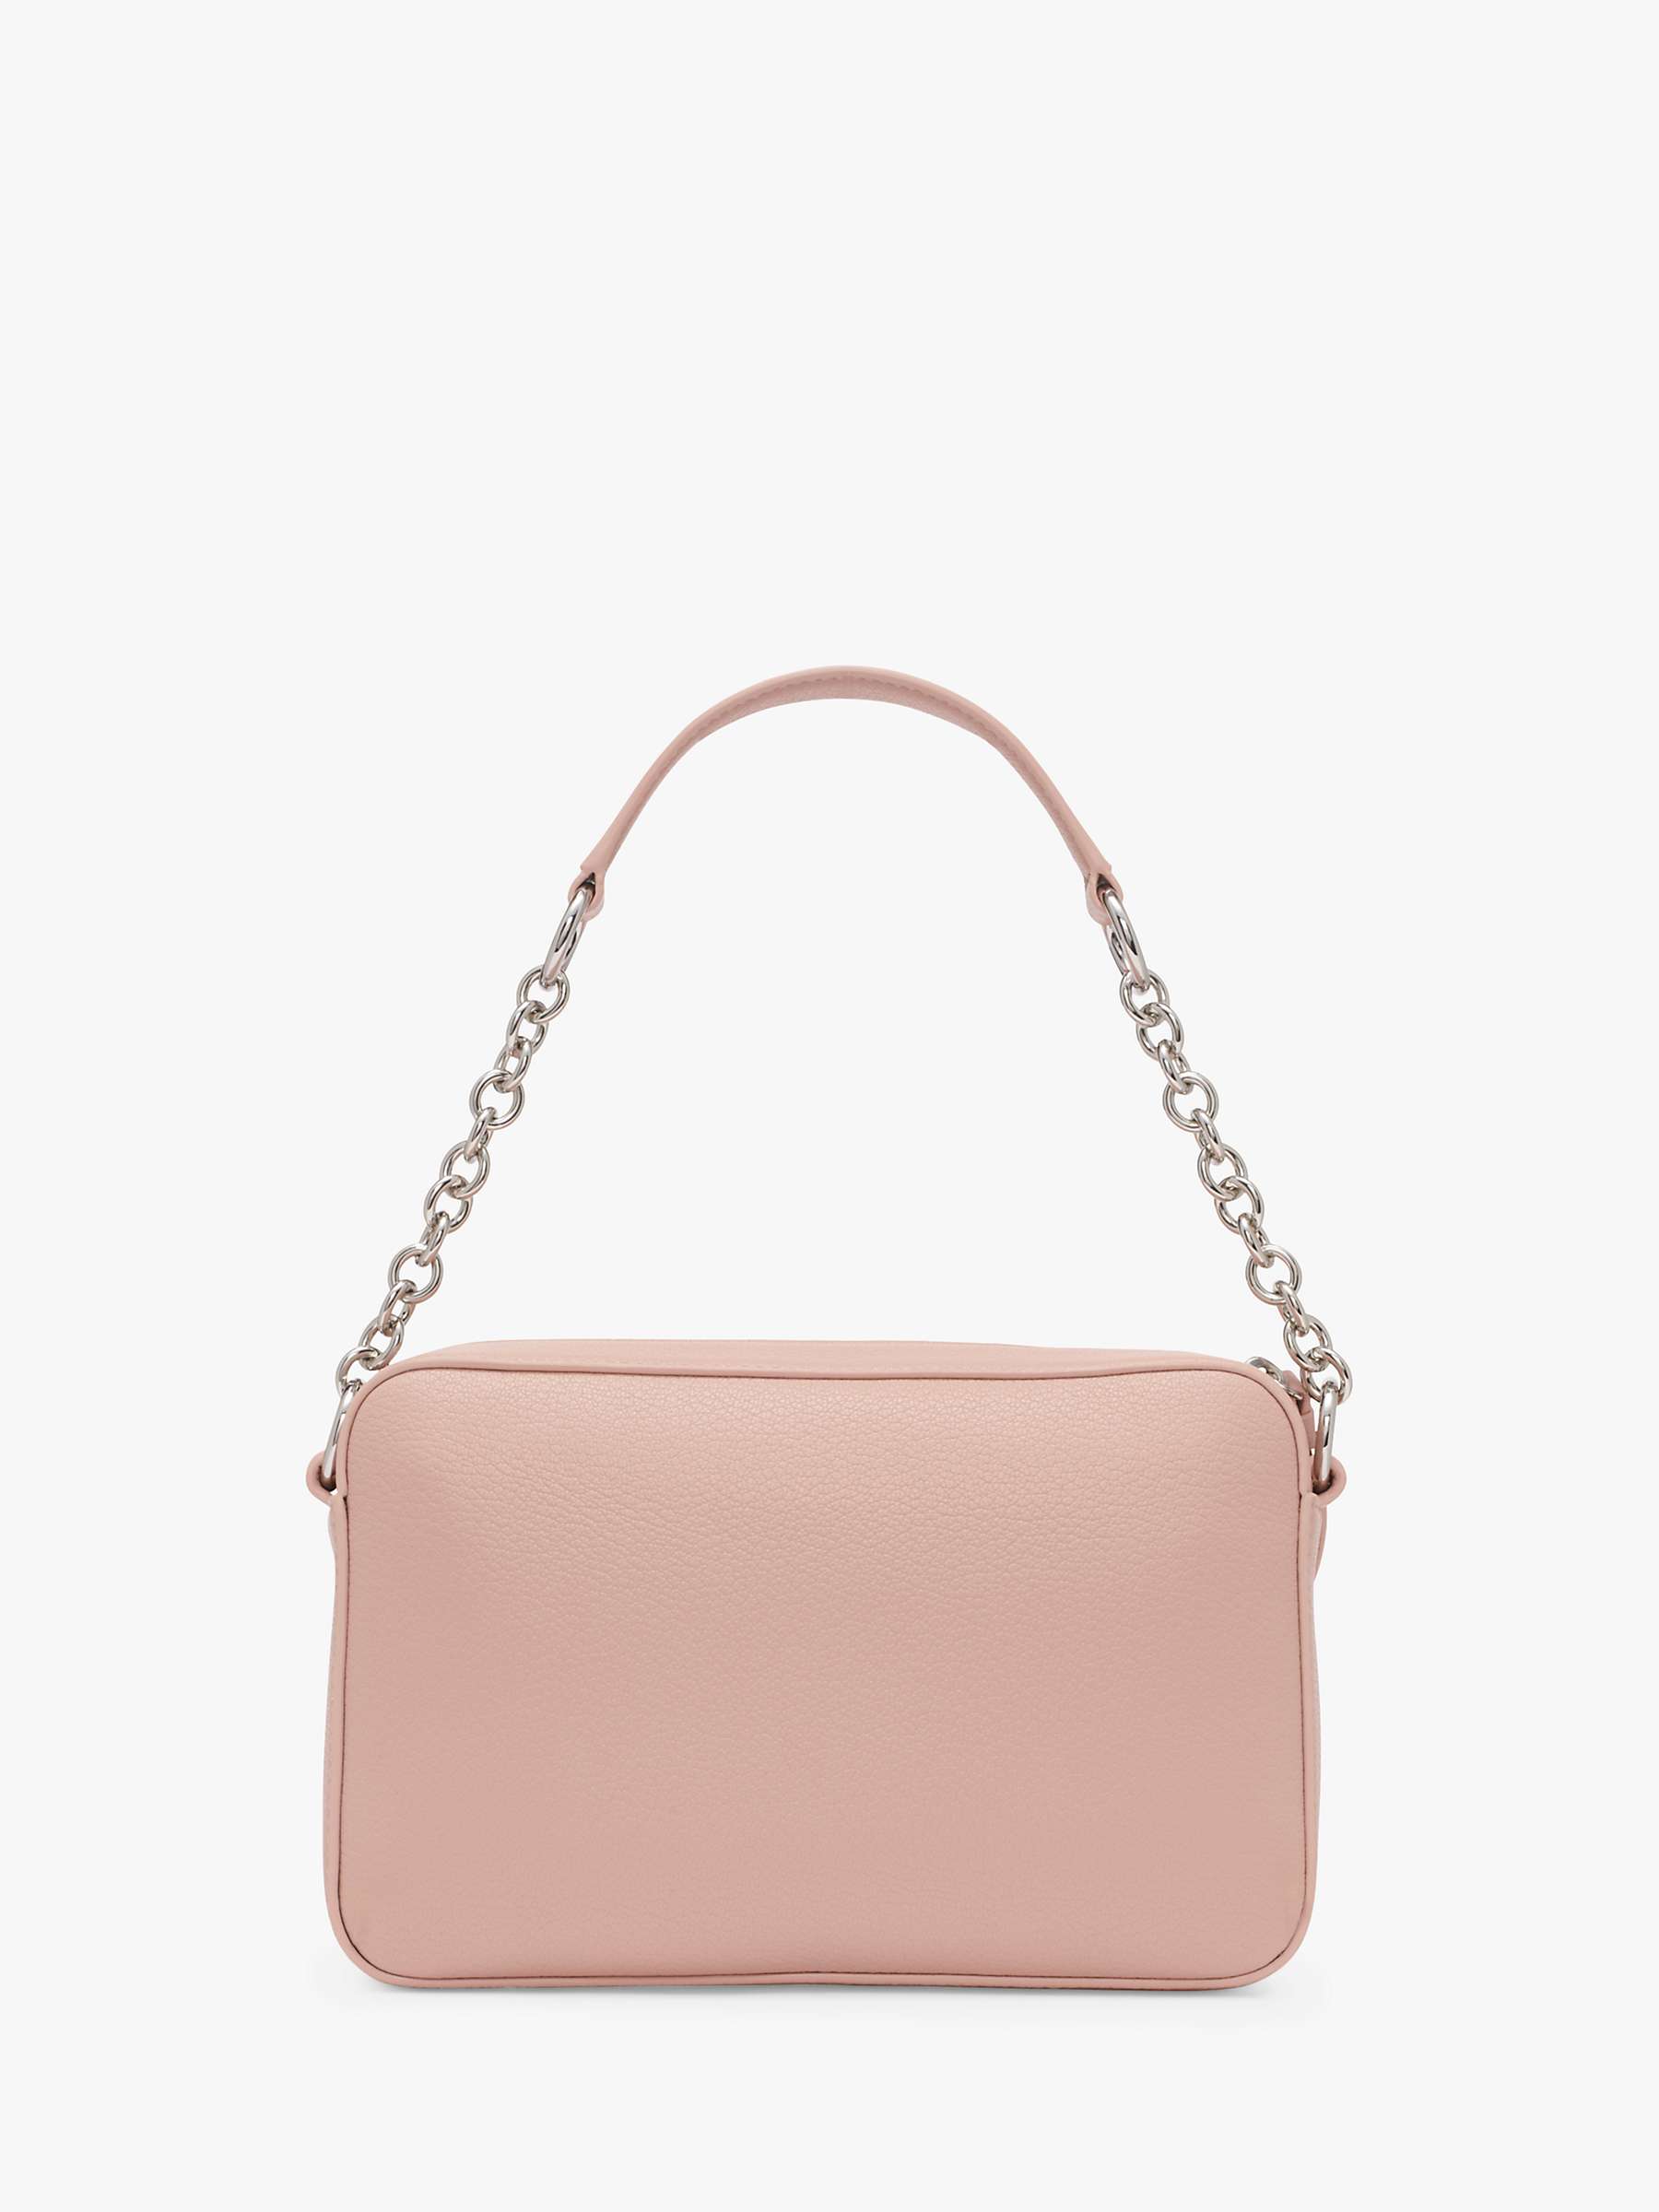 Buy DKNY Greenpoint Leather Camera Bag, Nude Online at johnlewis.com